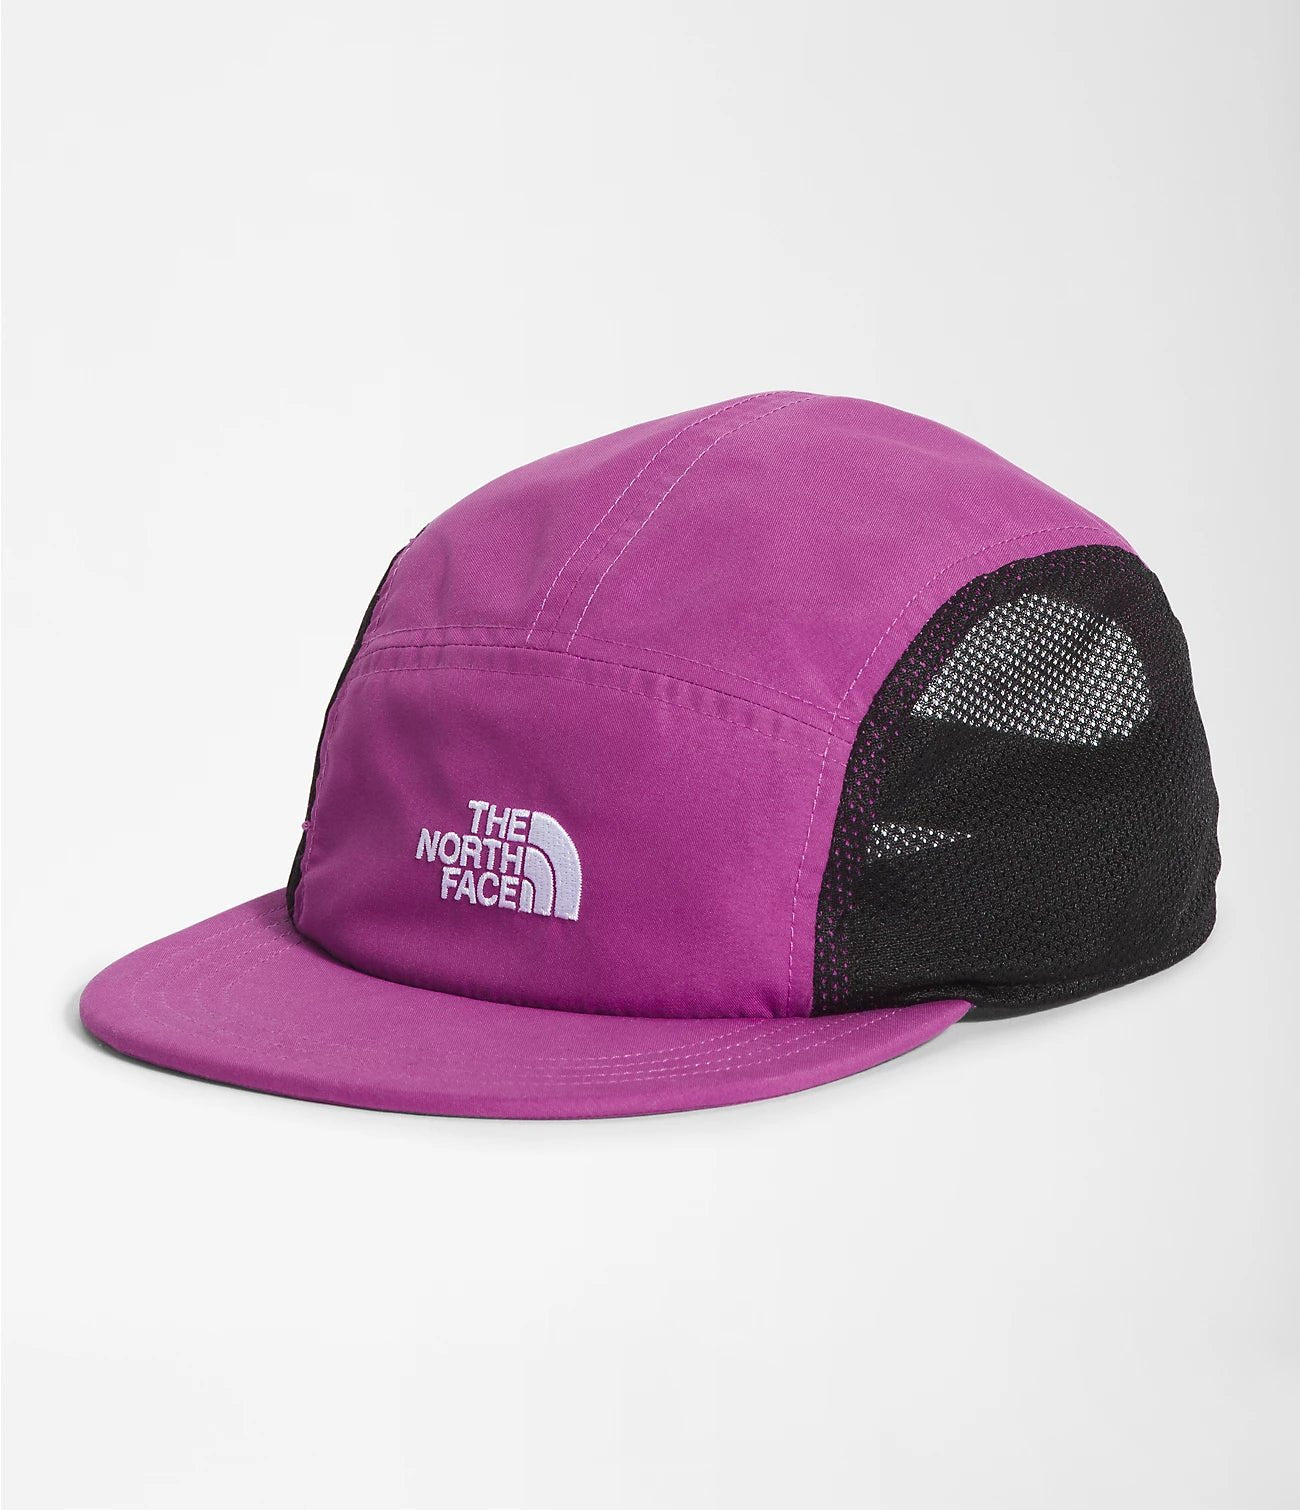 The North Face Kids' Class V Camp Hat - Mountain Kids Outfitters: Purple Cactus Flower Color side view